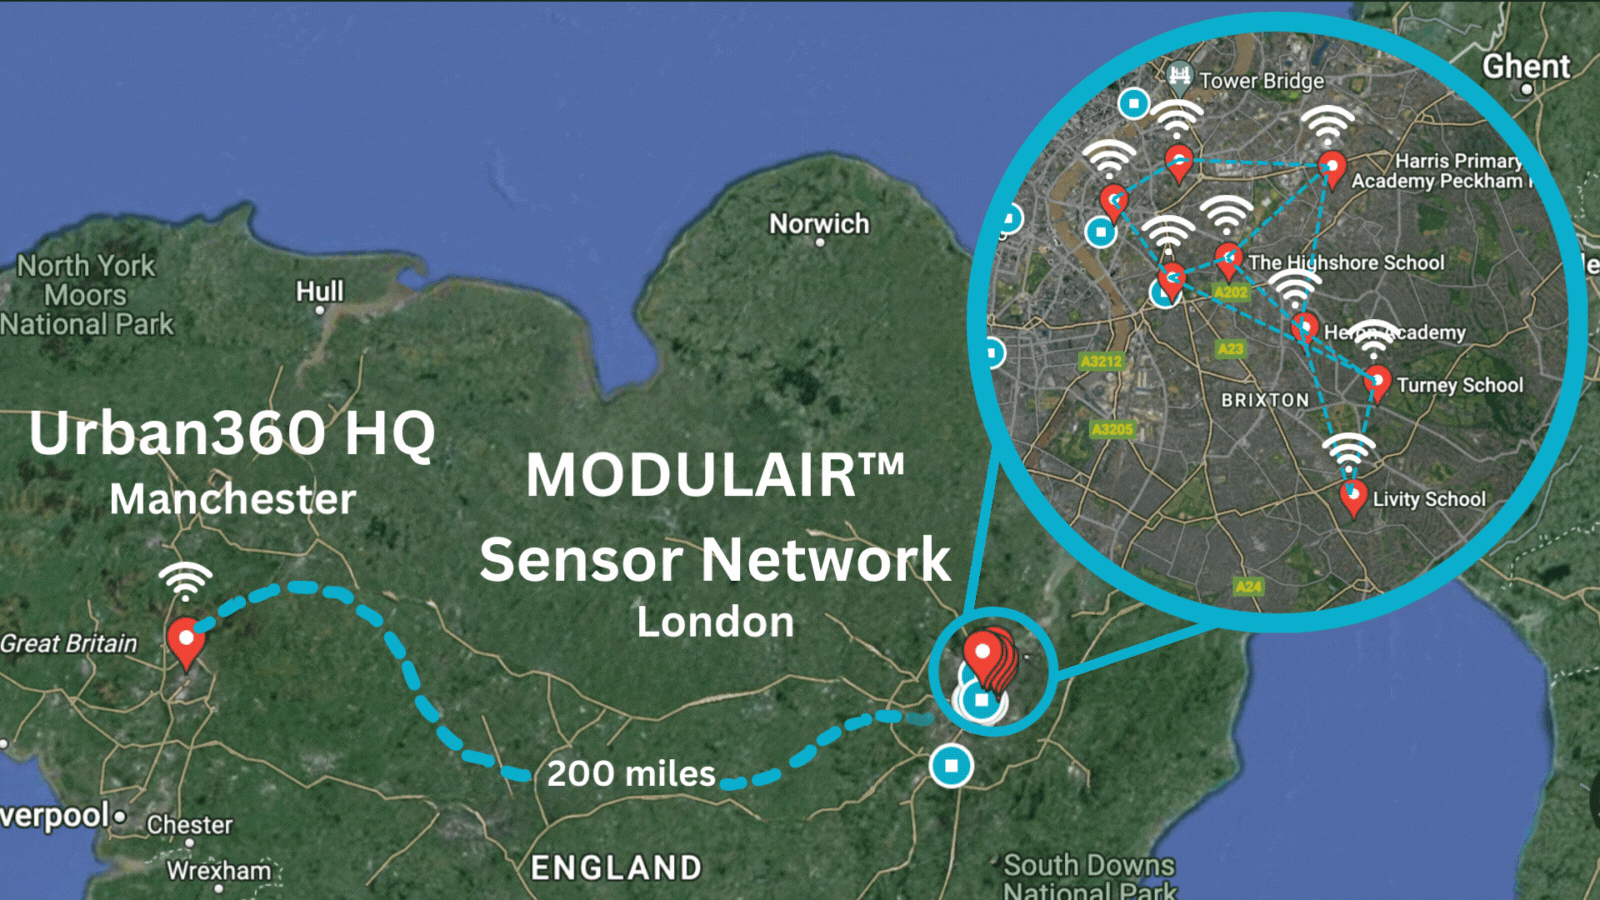 Keeping your air quality monitoring projects on track from the comfort of your office